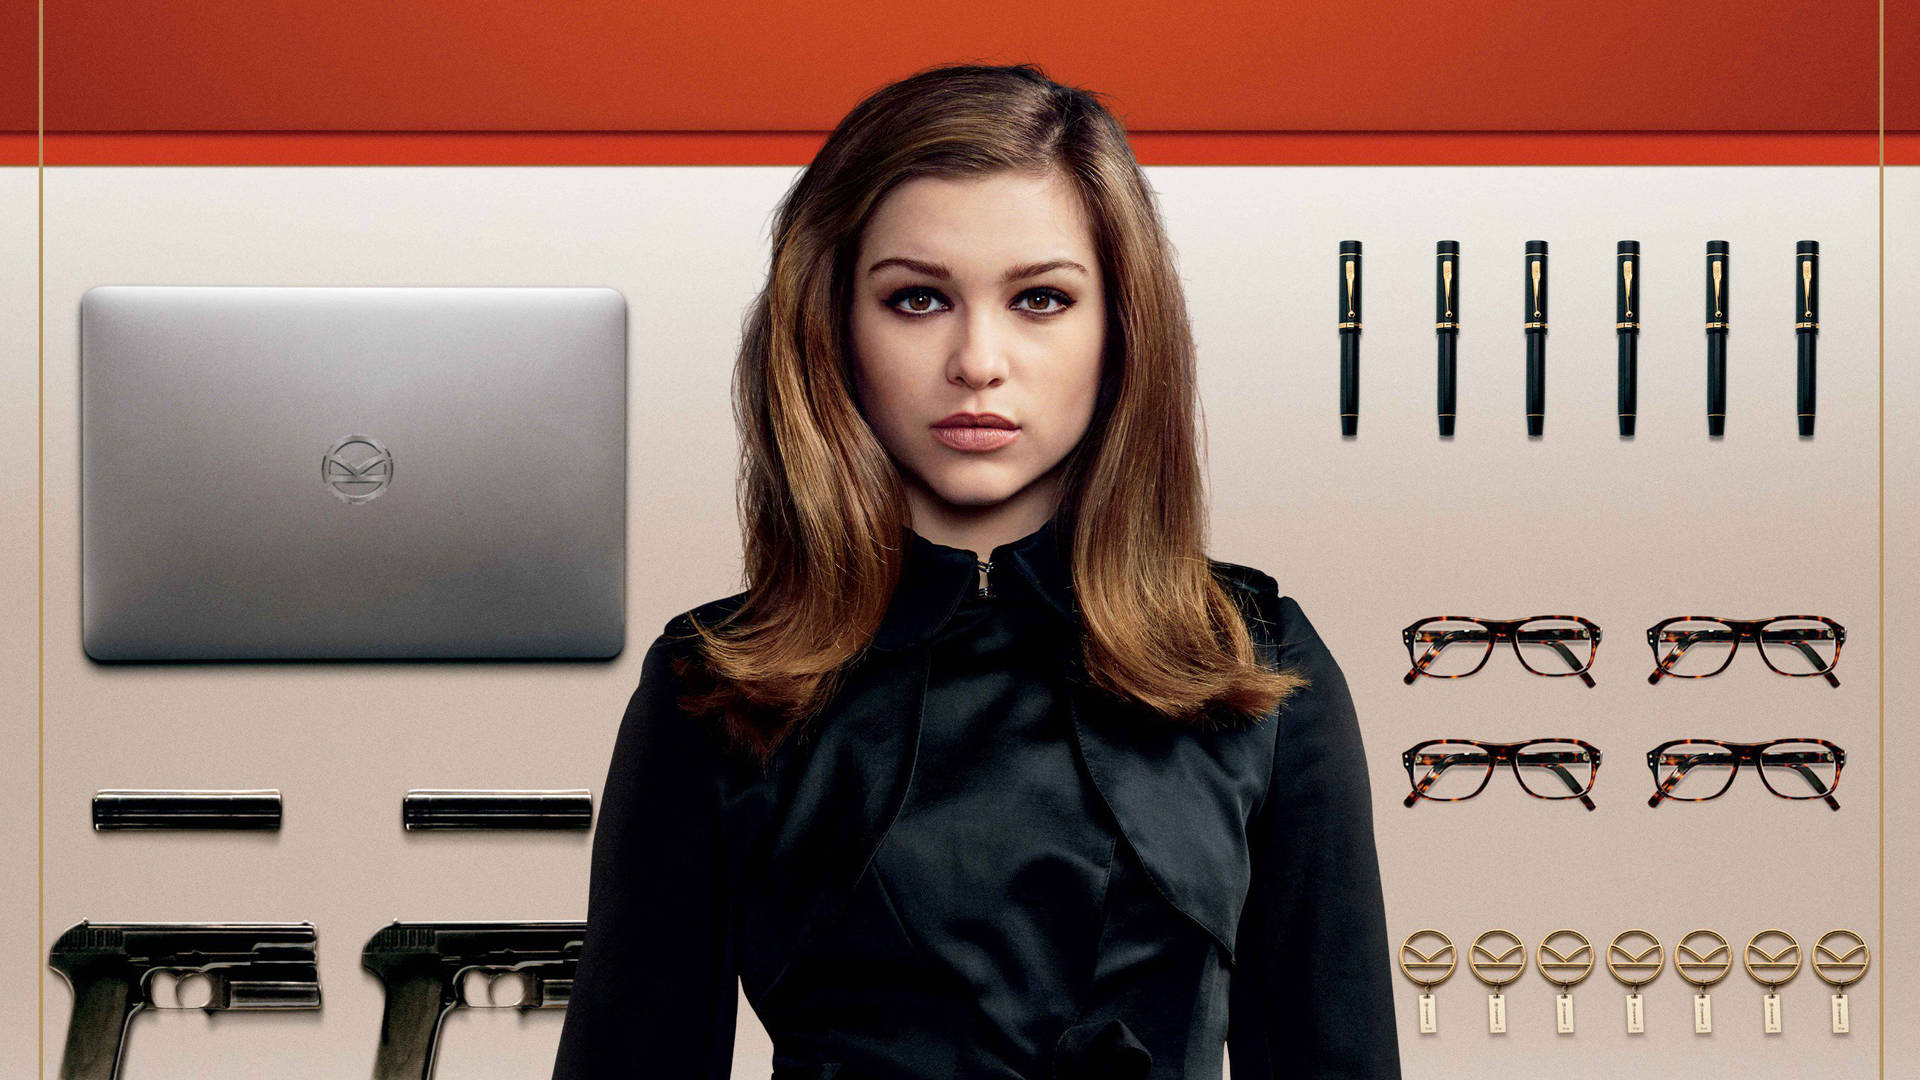 Caption: Roxy from Kingsman: The Golden Circle in Action Wallpaper